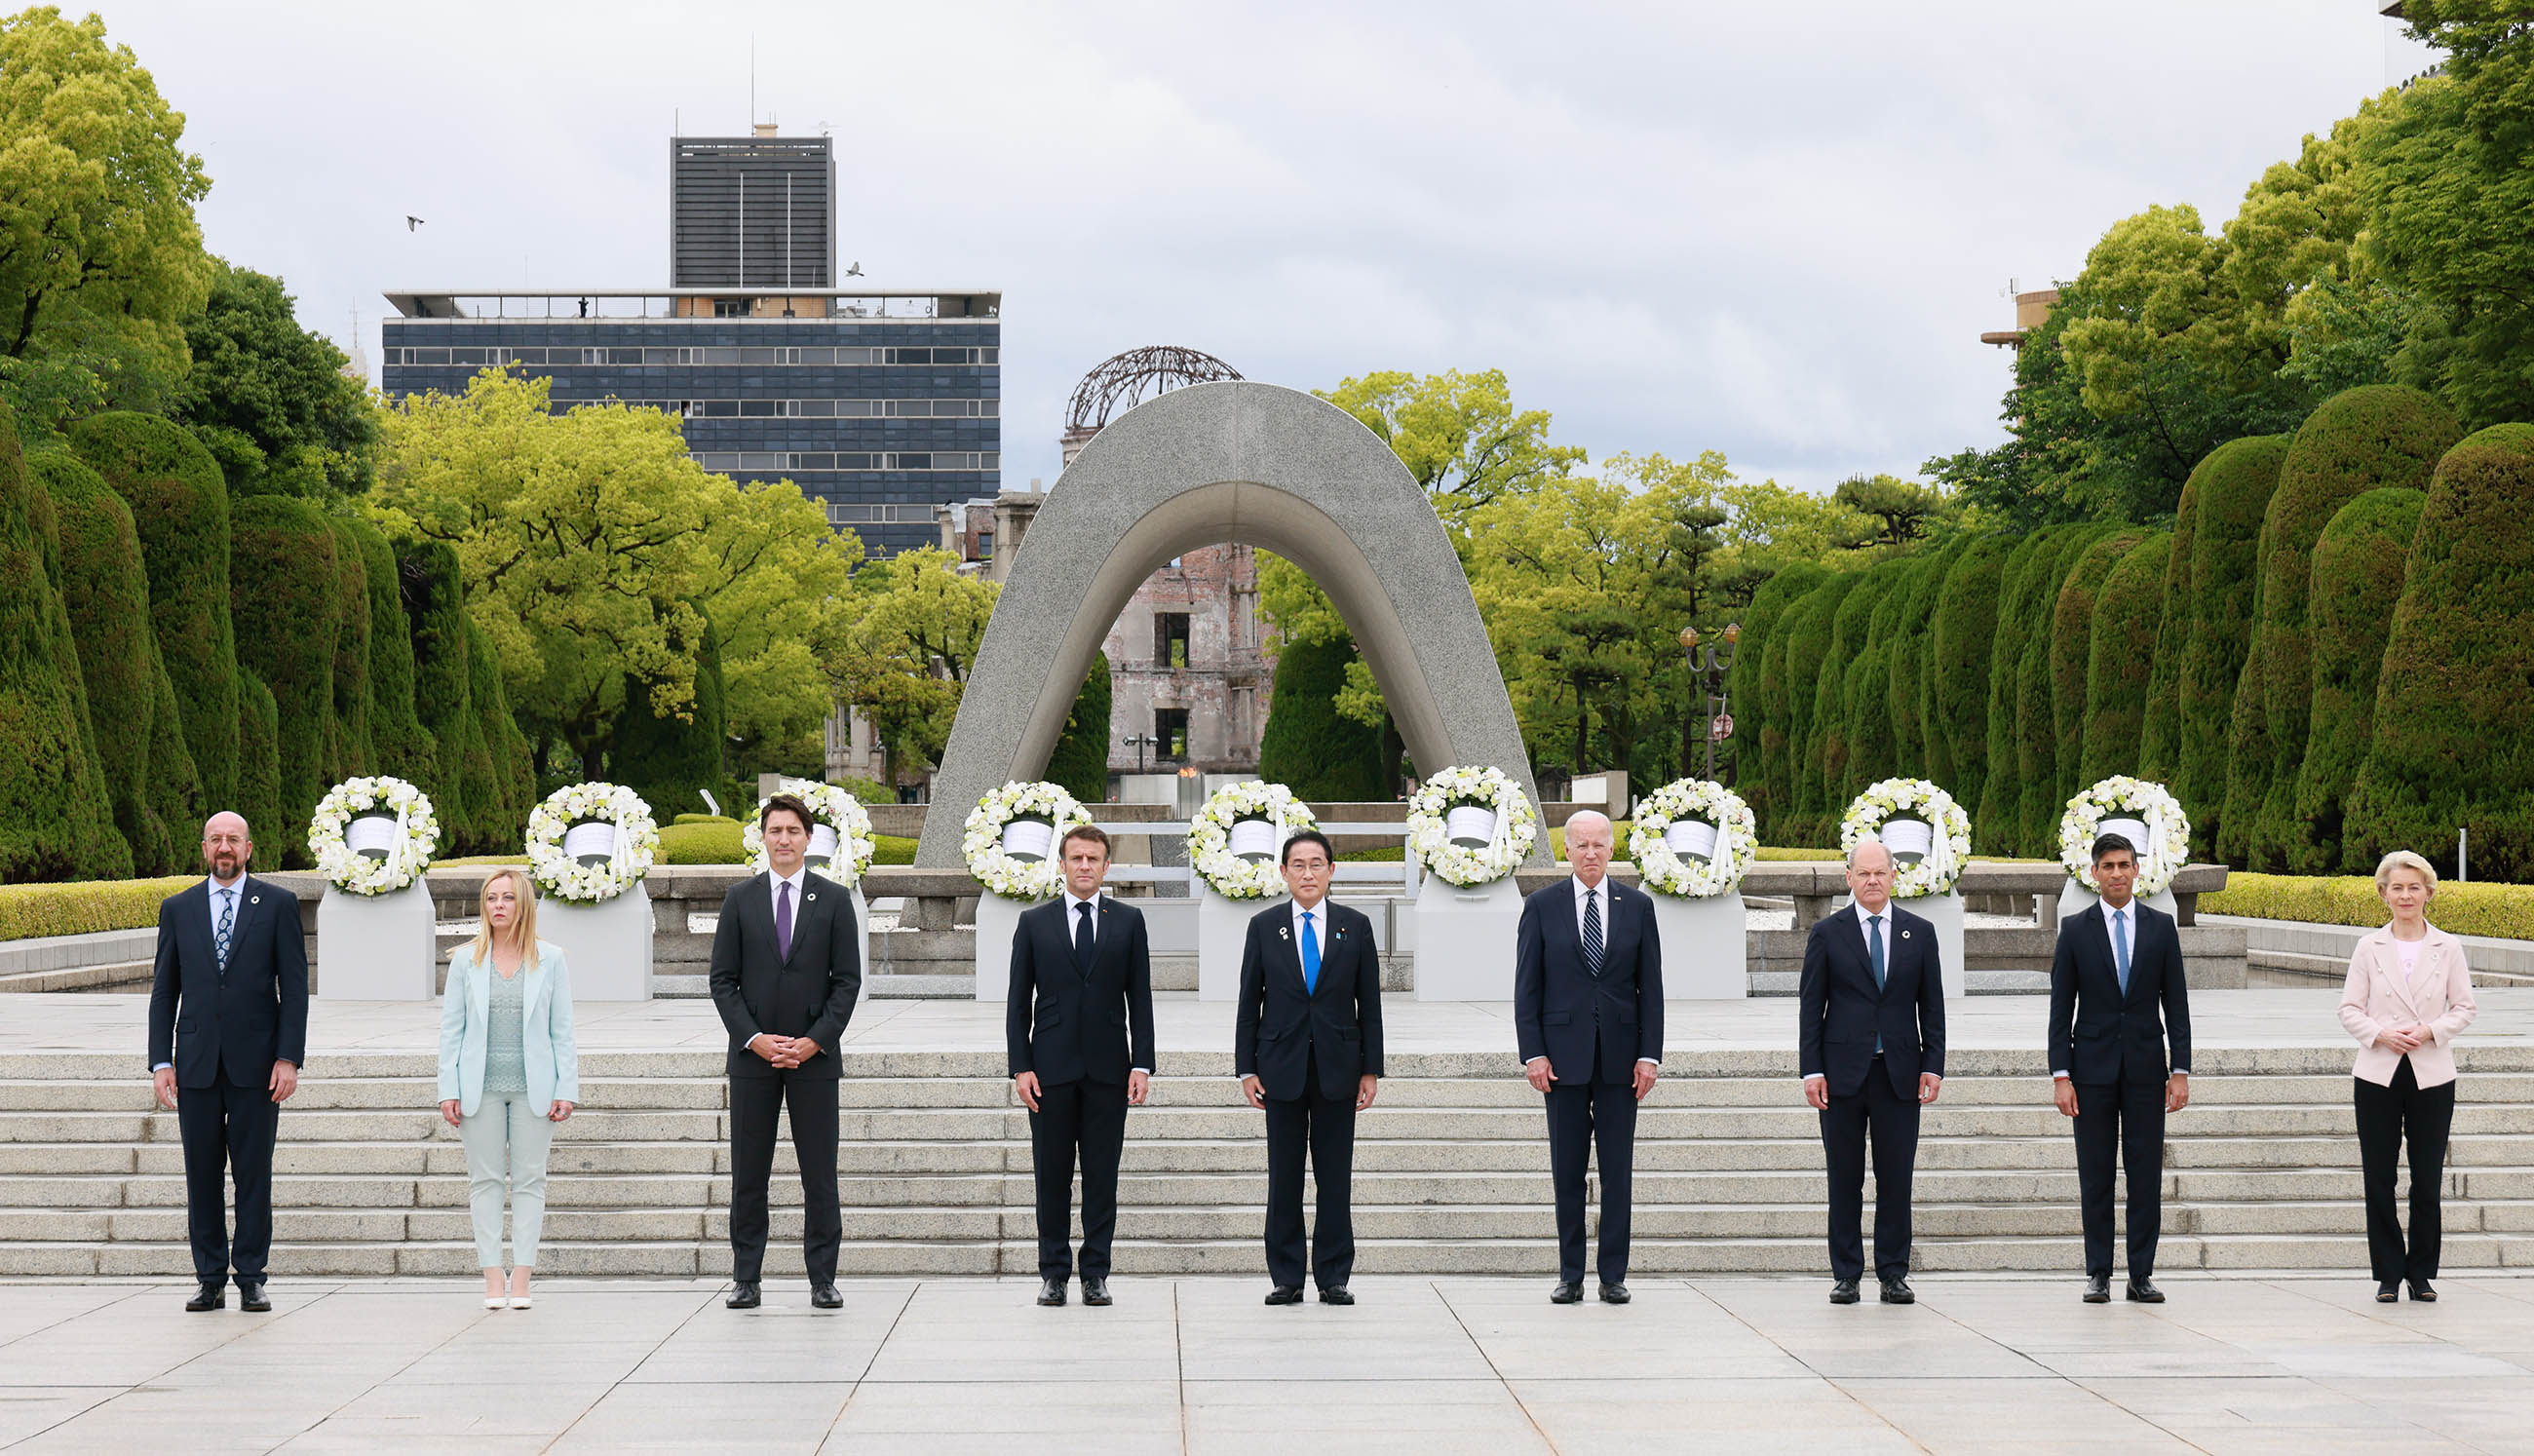 G7 Hiroshima Summit (First Day): Events Held at the Hiroshima Peace Memorial Park with the G7 Leaders and Others